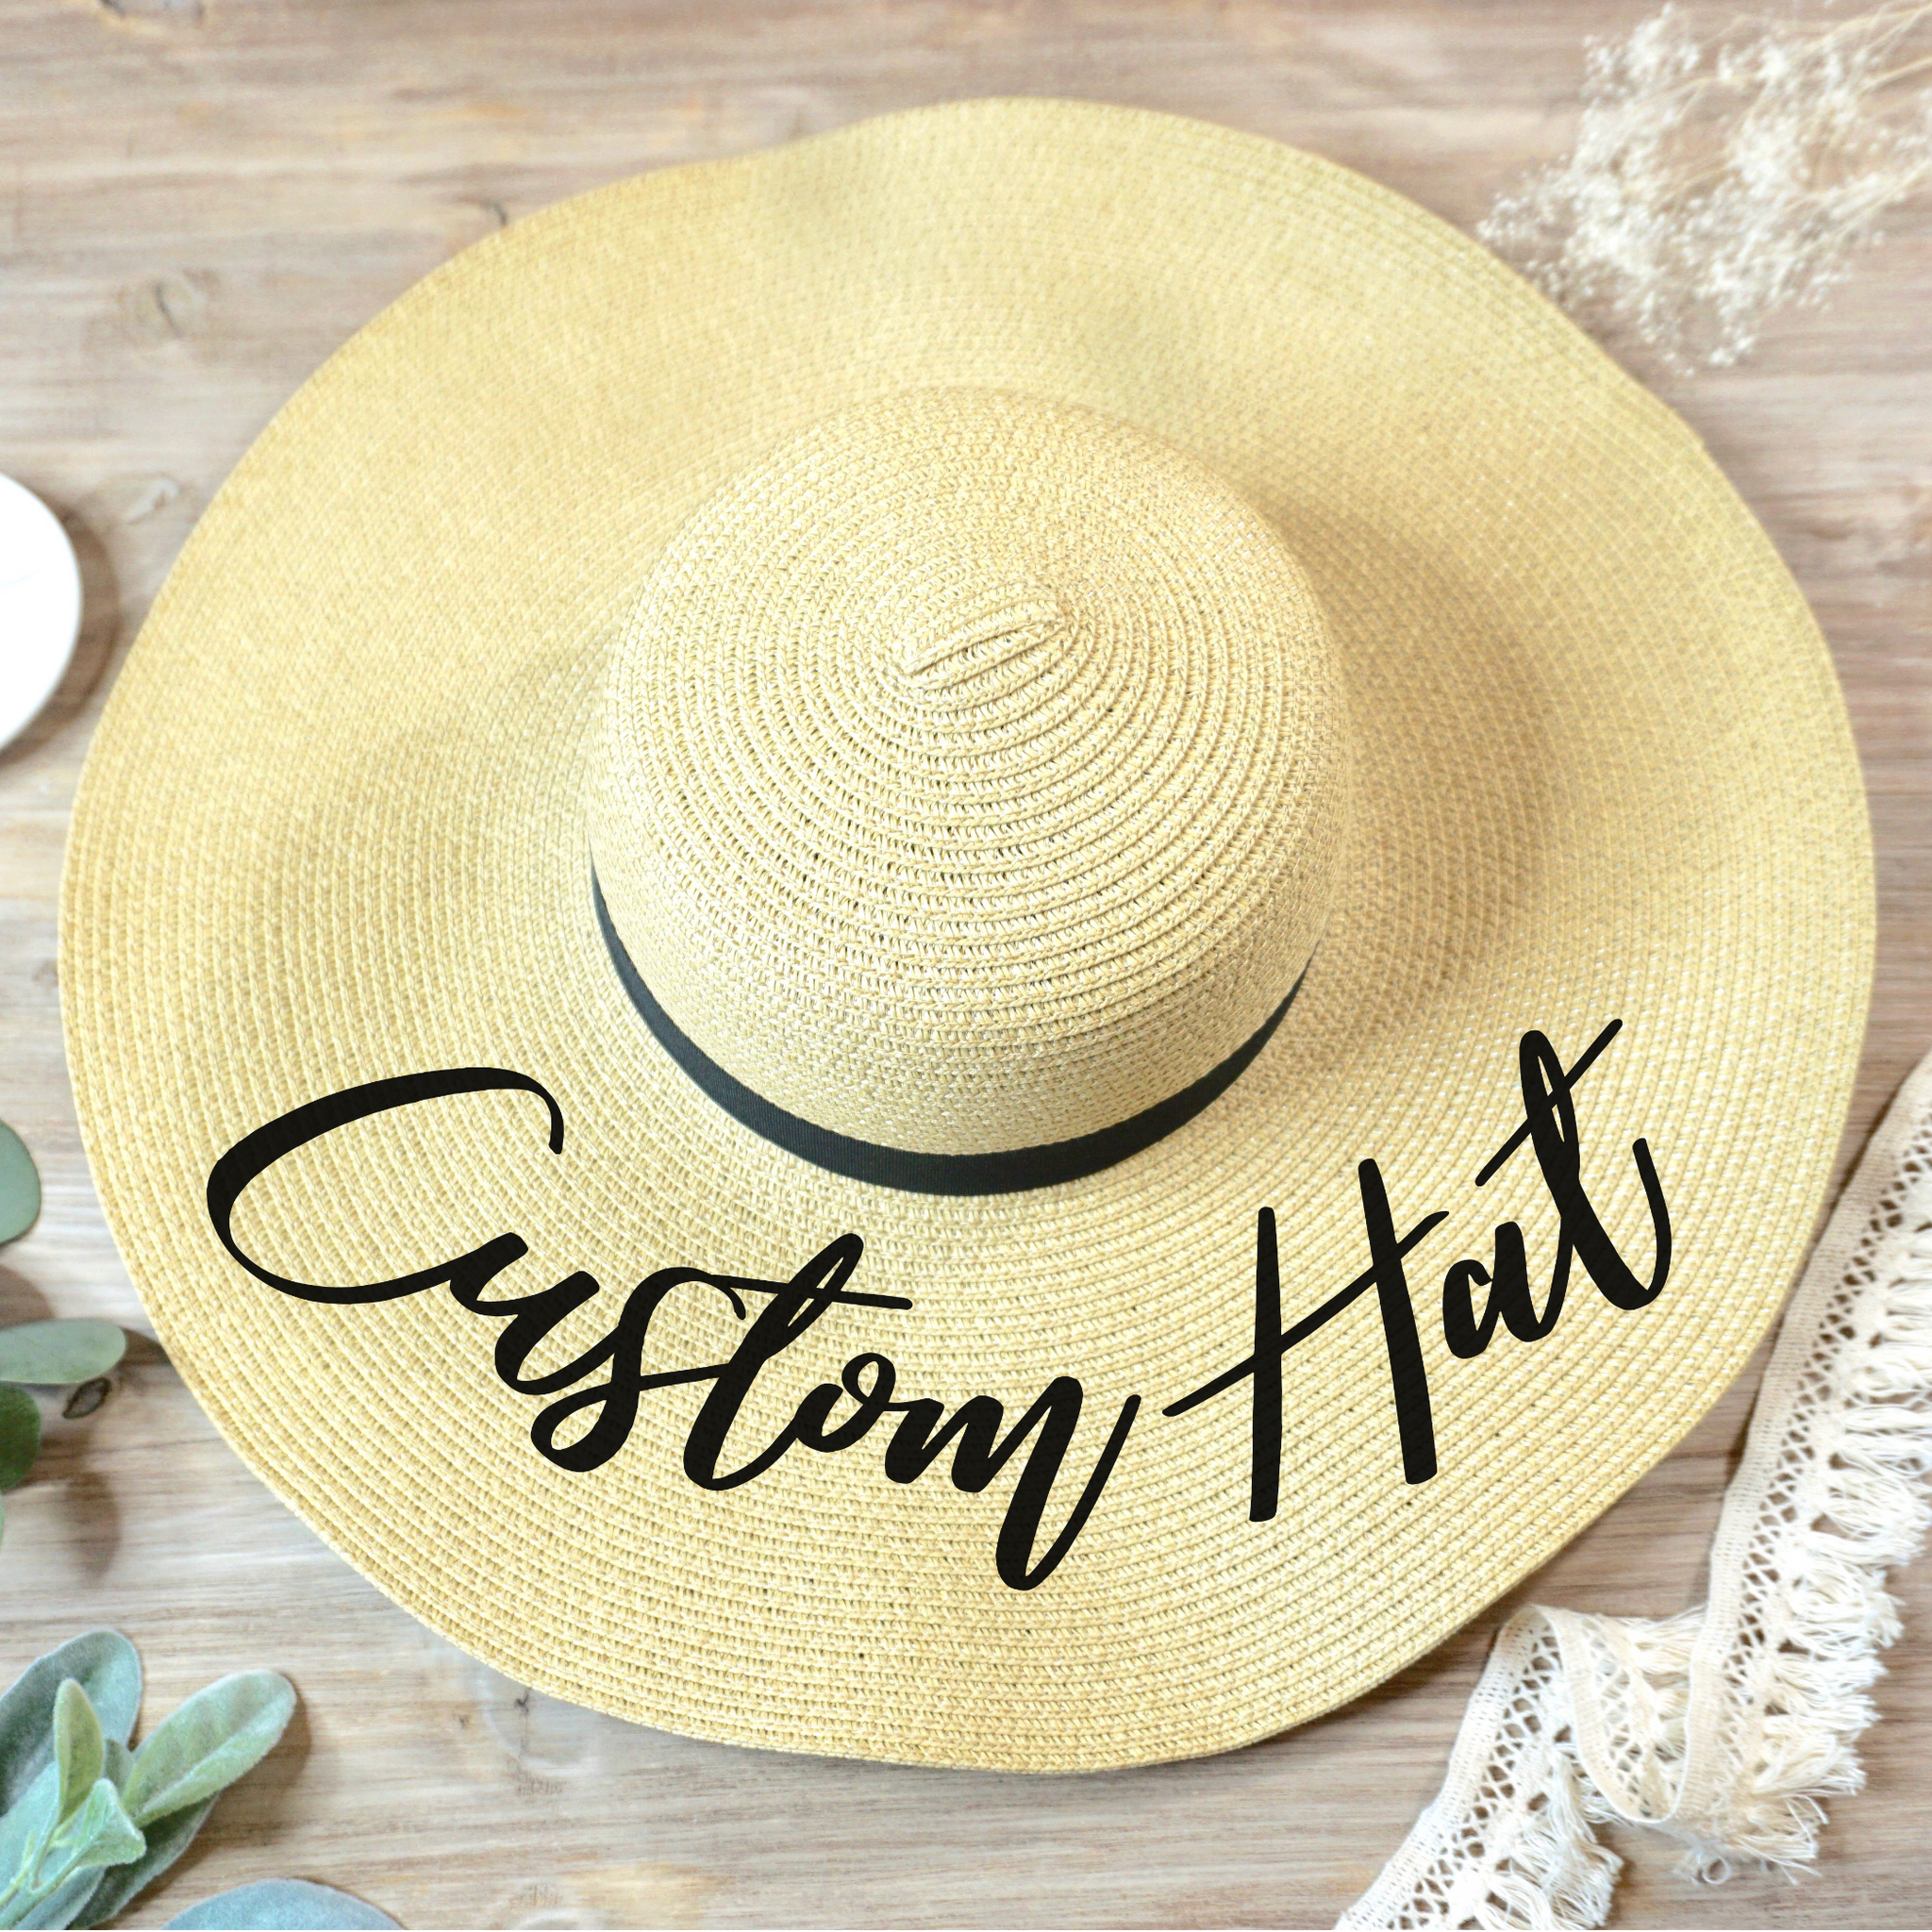 12 COLOR Custom Embroidered Women's Sun Hat Pom Pom Floppy Beach Hat Bridal  Beach Hat Bachelor Party Solid Color Big Brim Hat/cool Straw Hat 